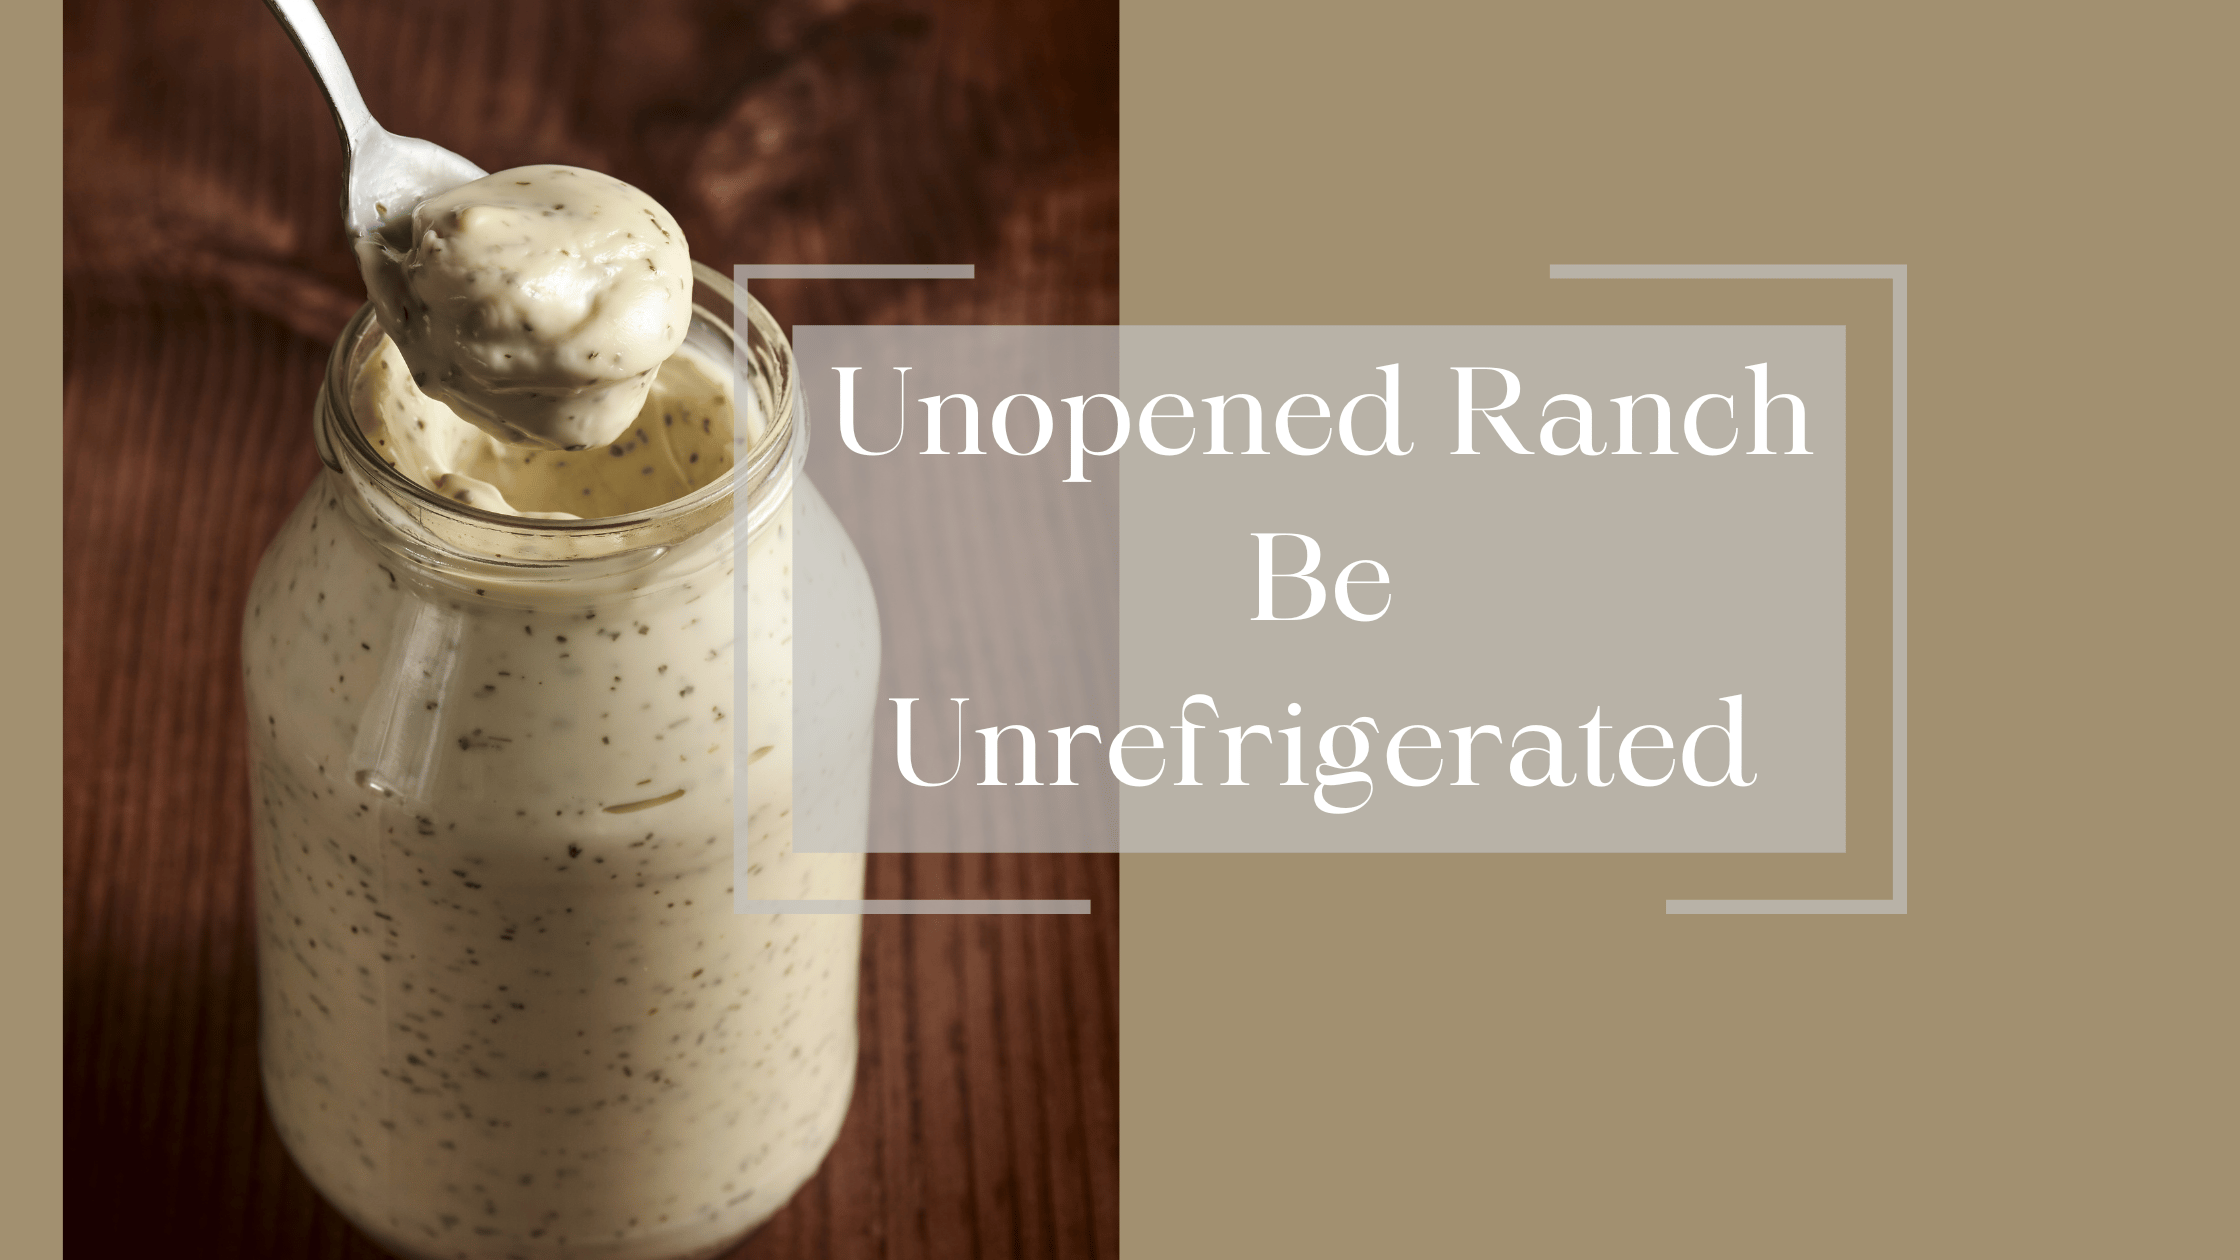 Unopened Ranch Be Unrefrigerated